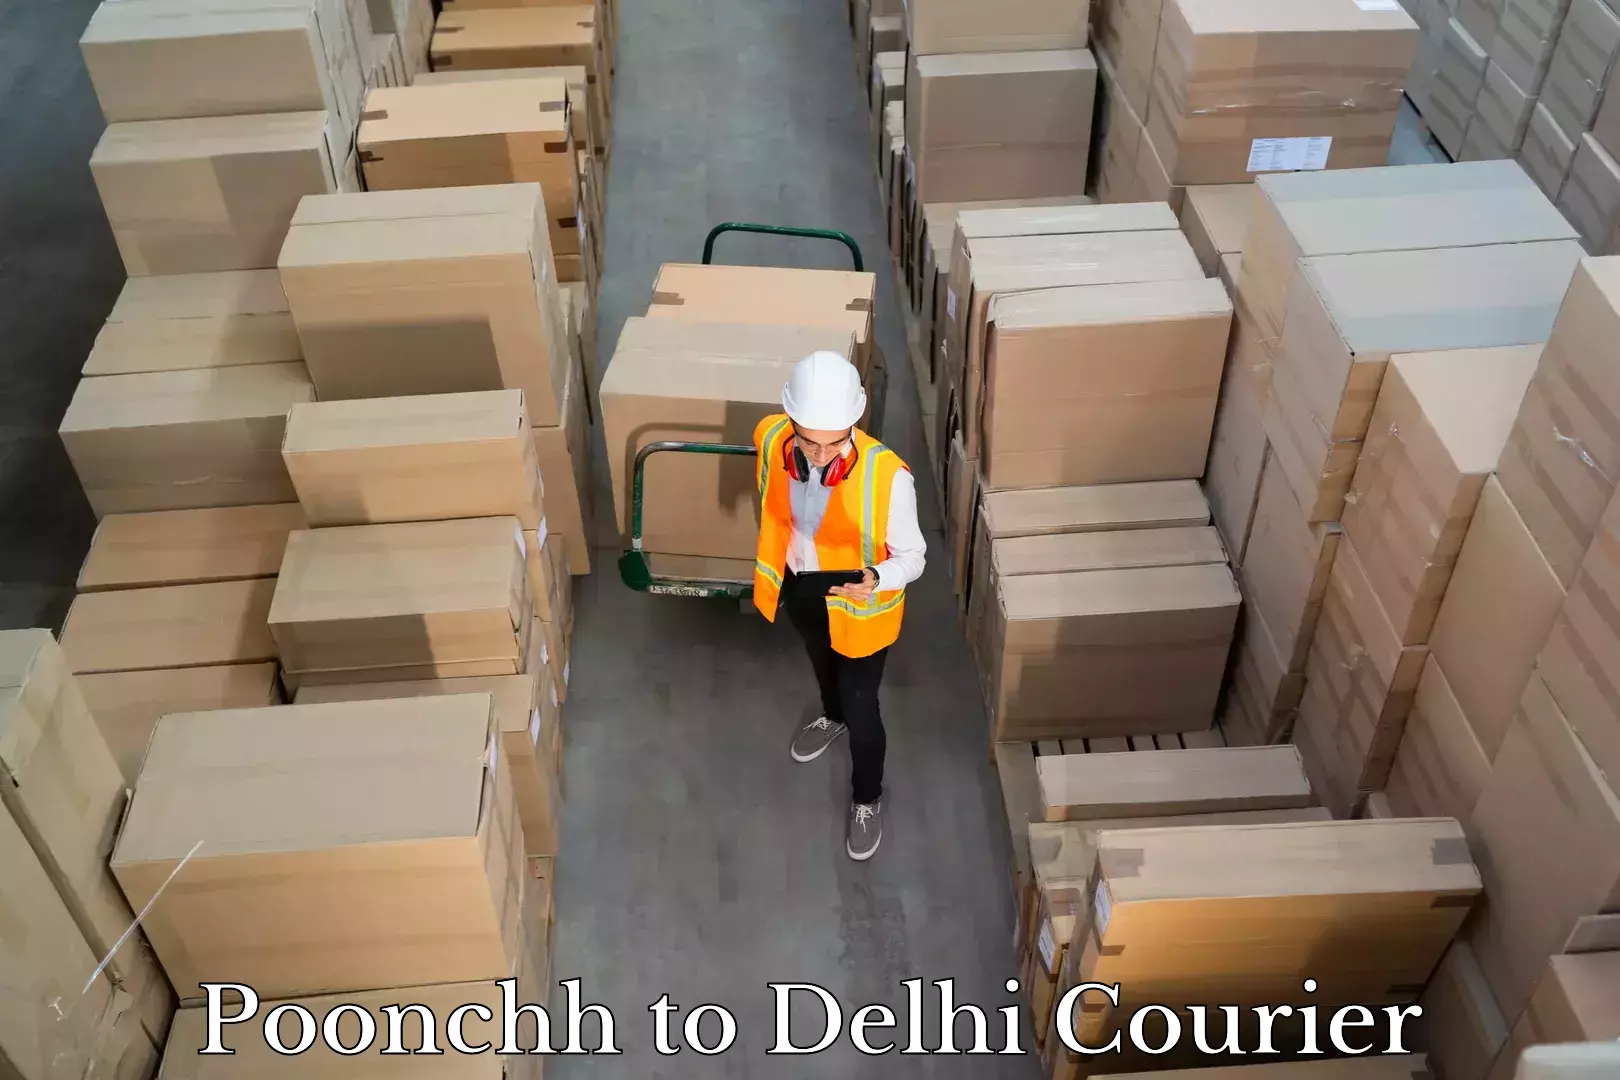 Luggage dispatch service Poonchh to Delhi